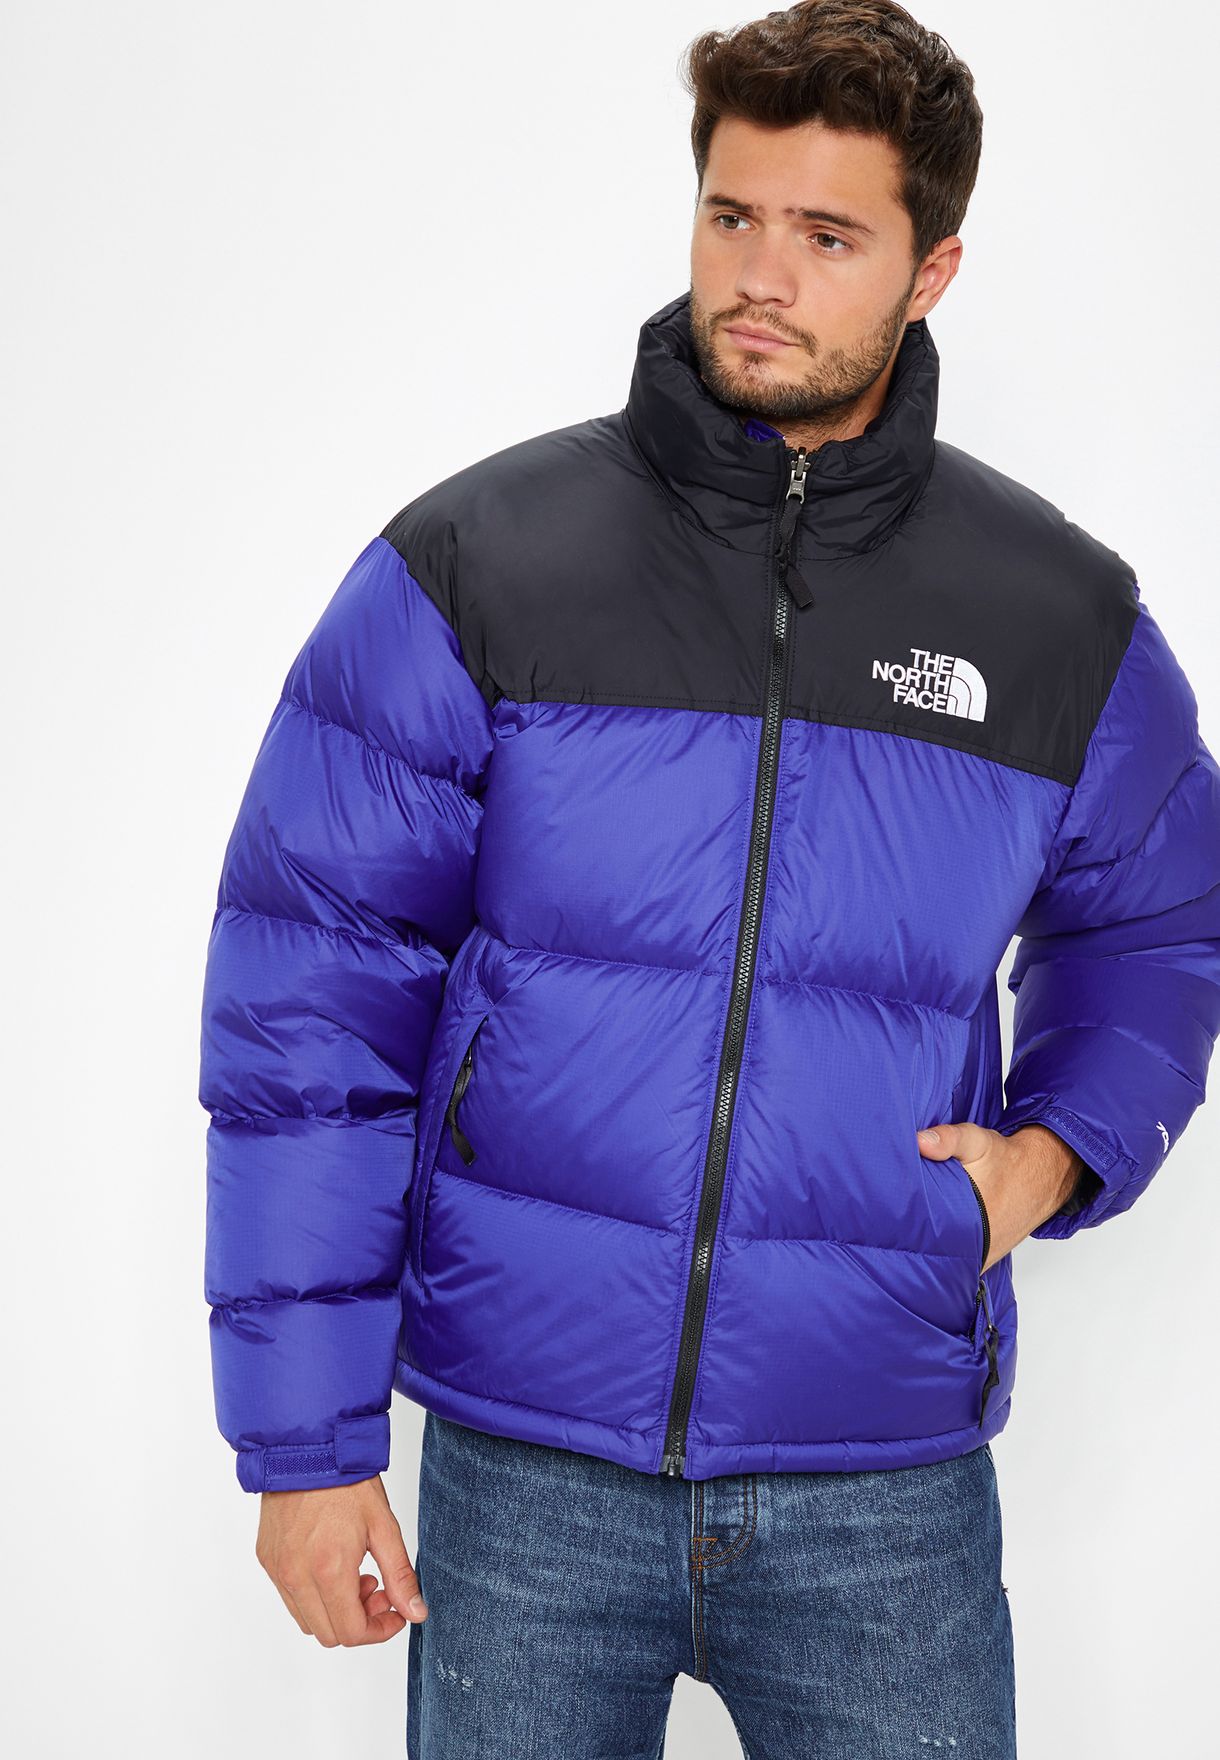 north face nuptse outfit